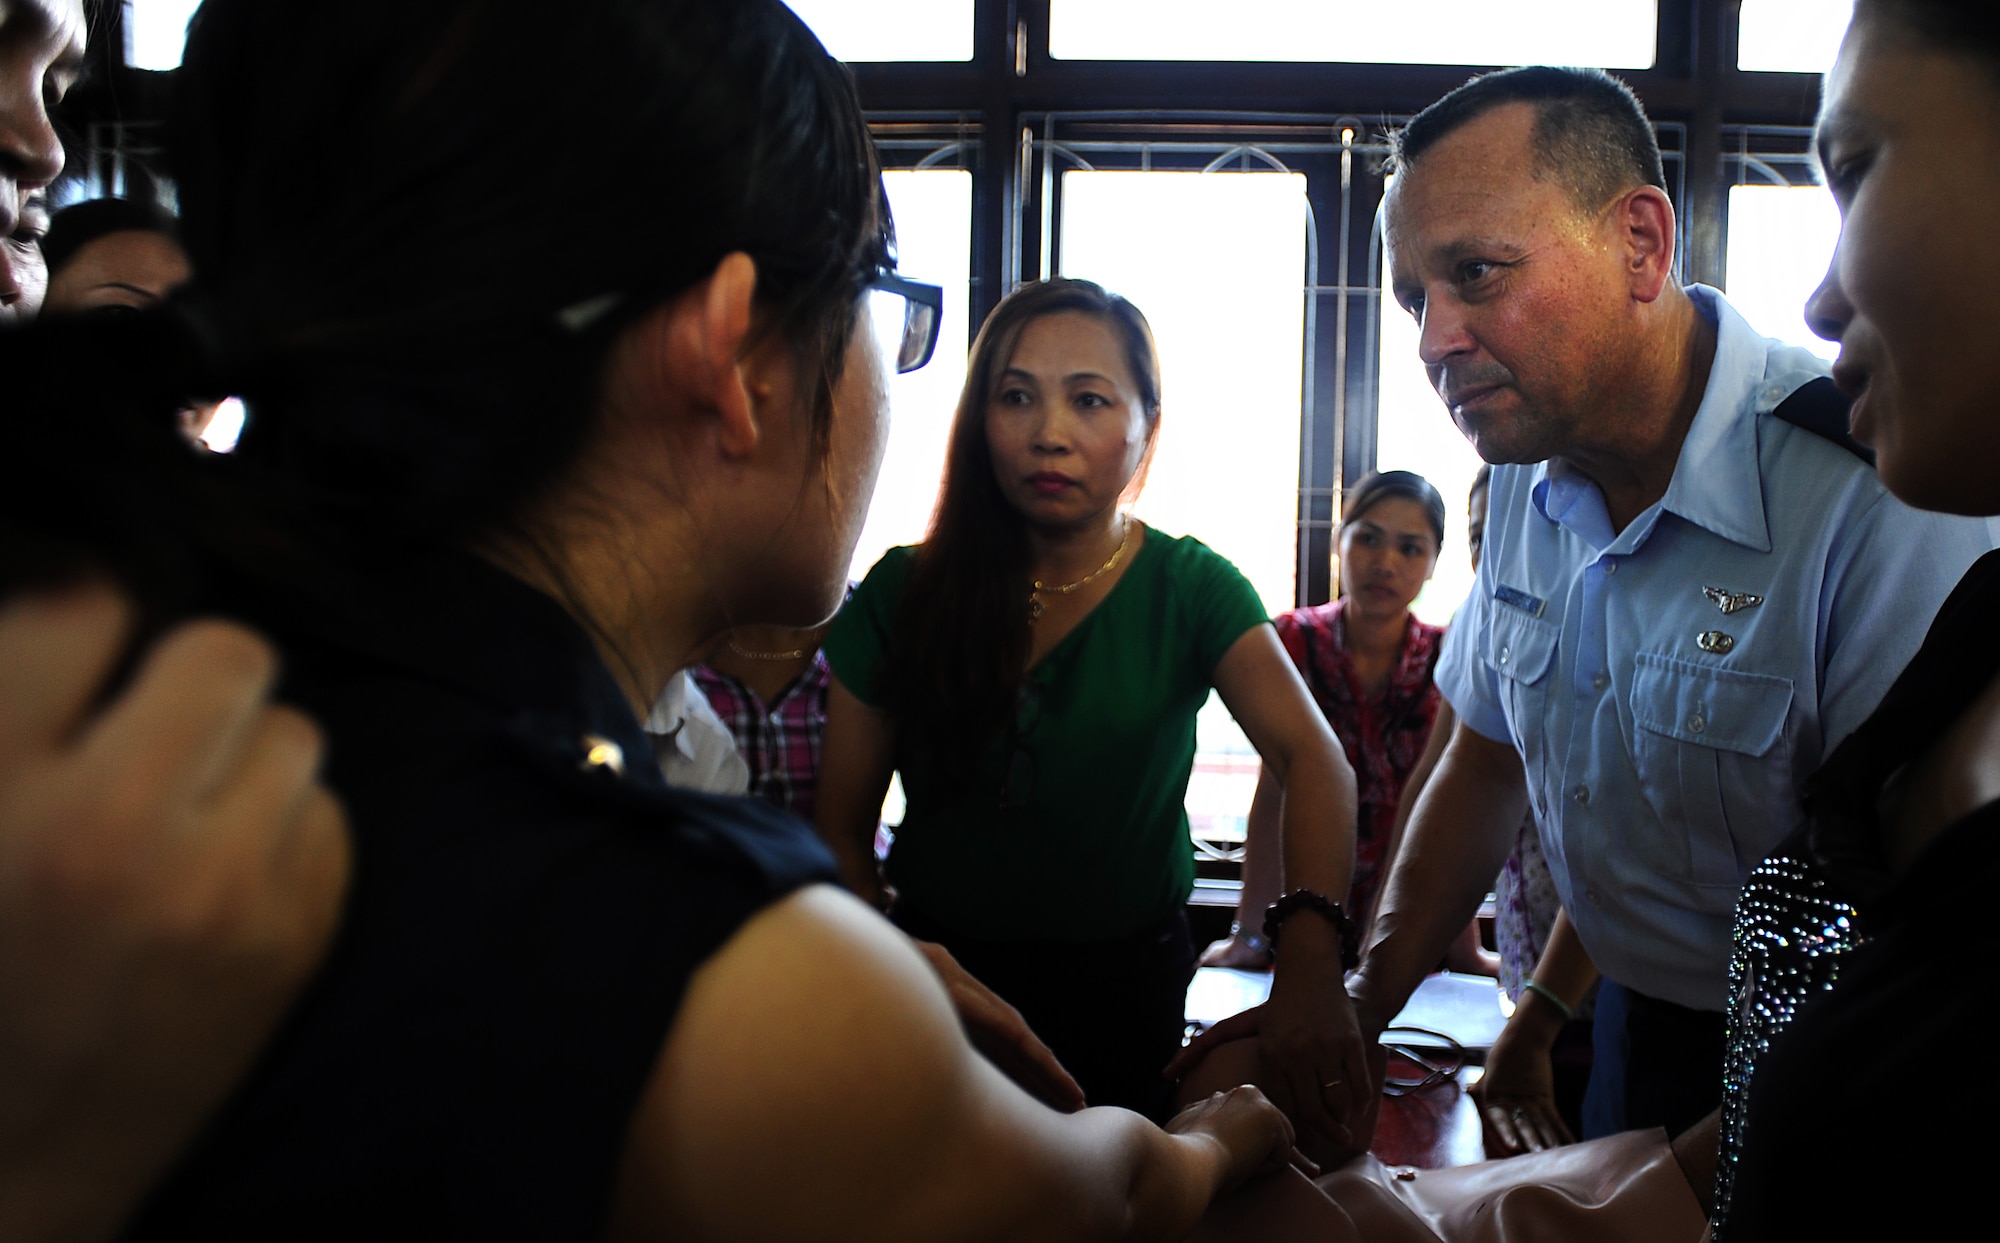 U.S. Air Force Col. John Fischer, an obstetrics and gynecology doctor at the Walter Reed National Military Medical Center Bethesda, Maryland, teaches the hands-on portion of the Prenatal/Obstetrics Emergency Subject Matter Expert Exchange to midwives and physicians from the local community in Dong Hoi, Quang Binh Province, as part of Operation Pacific Angel, June 10, 2013. Operation PACANGEL is a joint and combined humanitarian assistance exercise held in various countries several times a year and includes medical, dental, optometry, engineering programs and a variety of SMEEs. (U.S. Air Force photo by Staff Sgt. Sara Csurilla)

